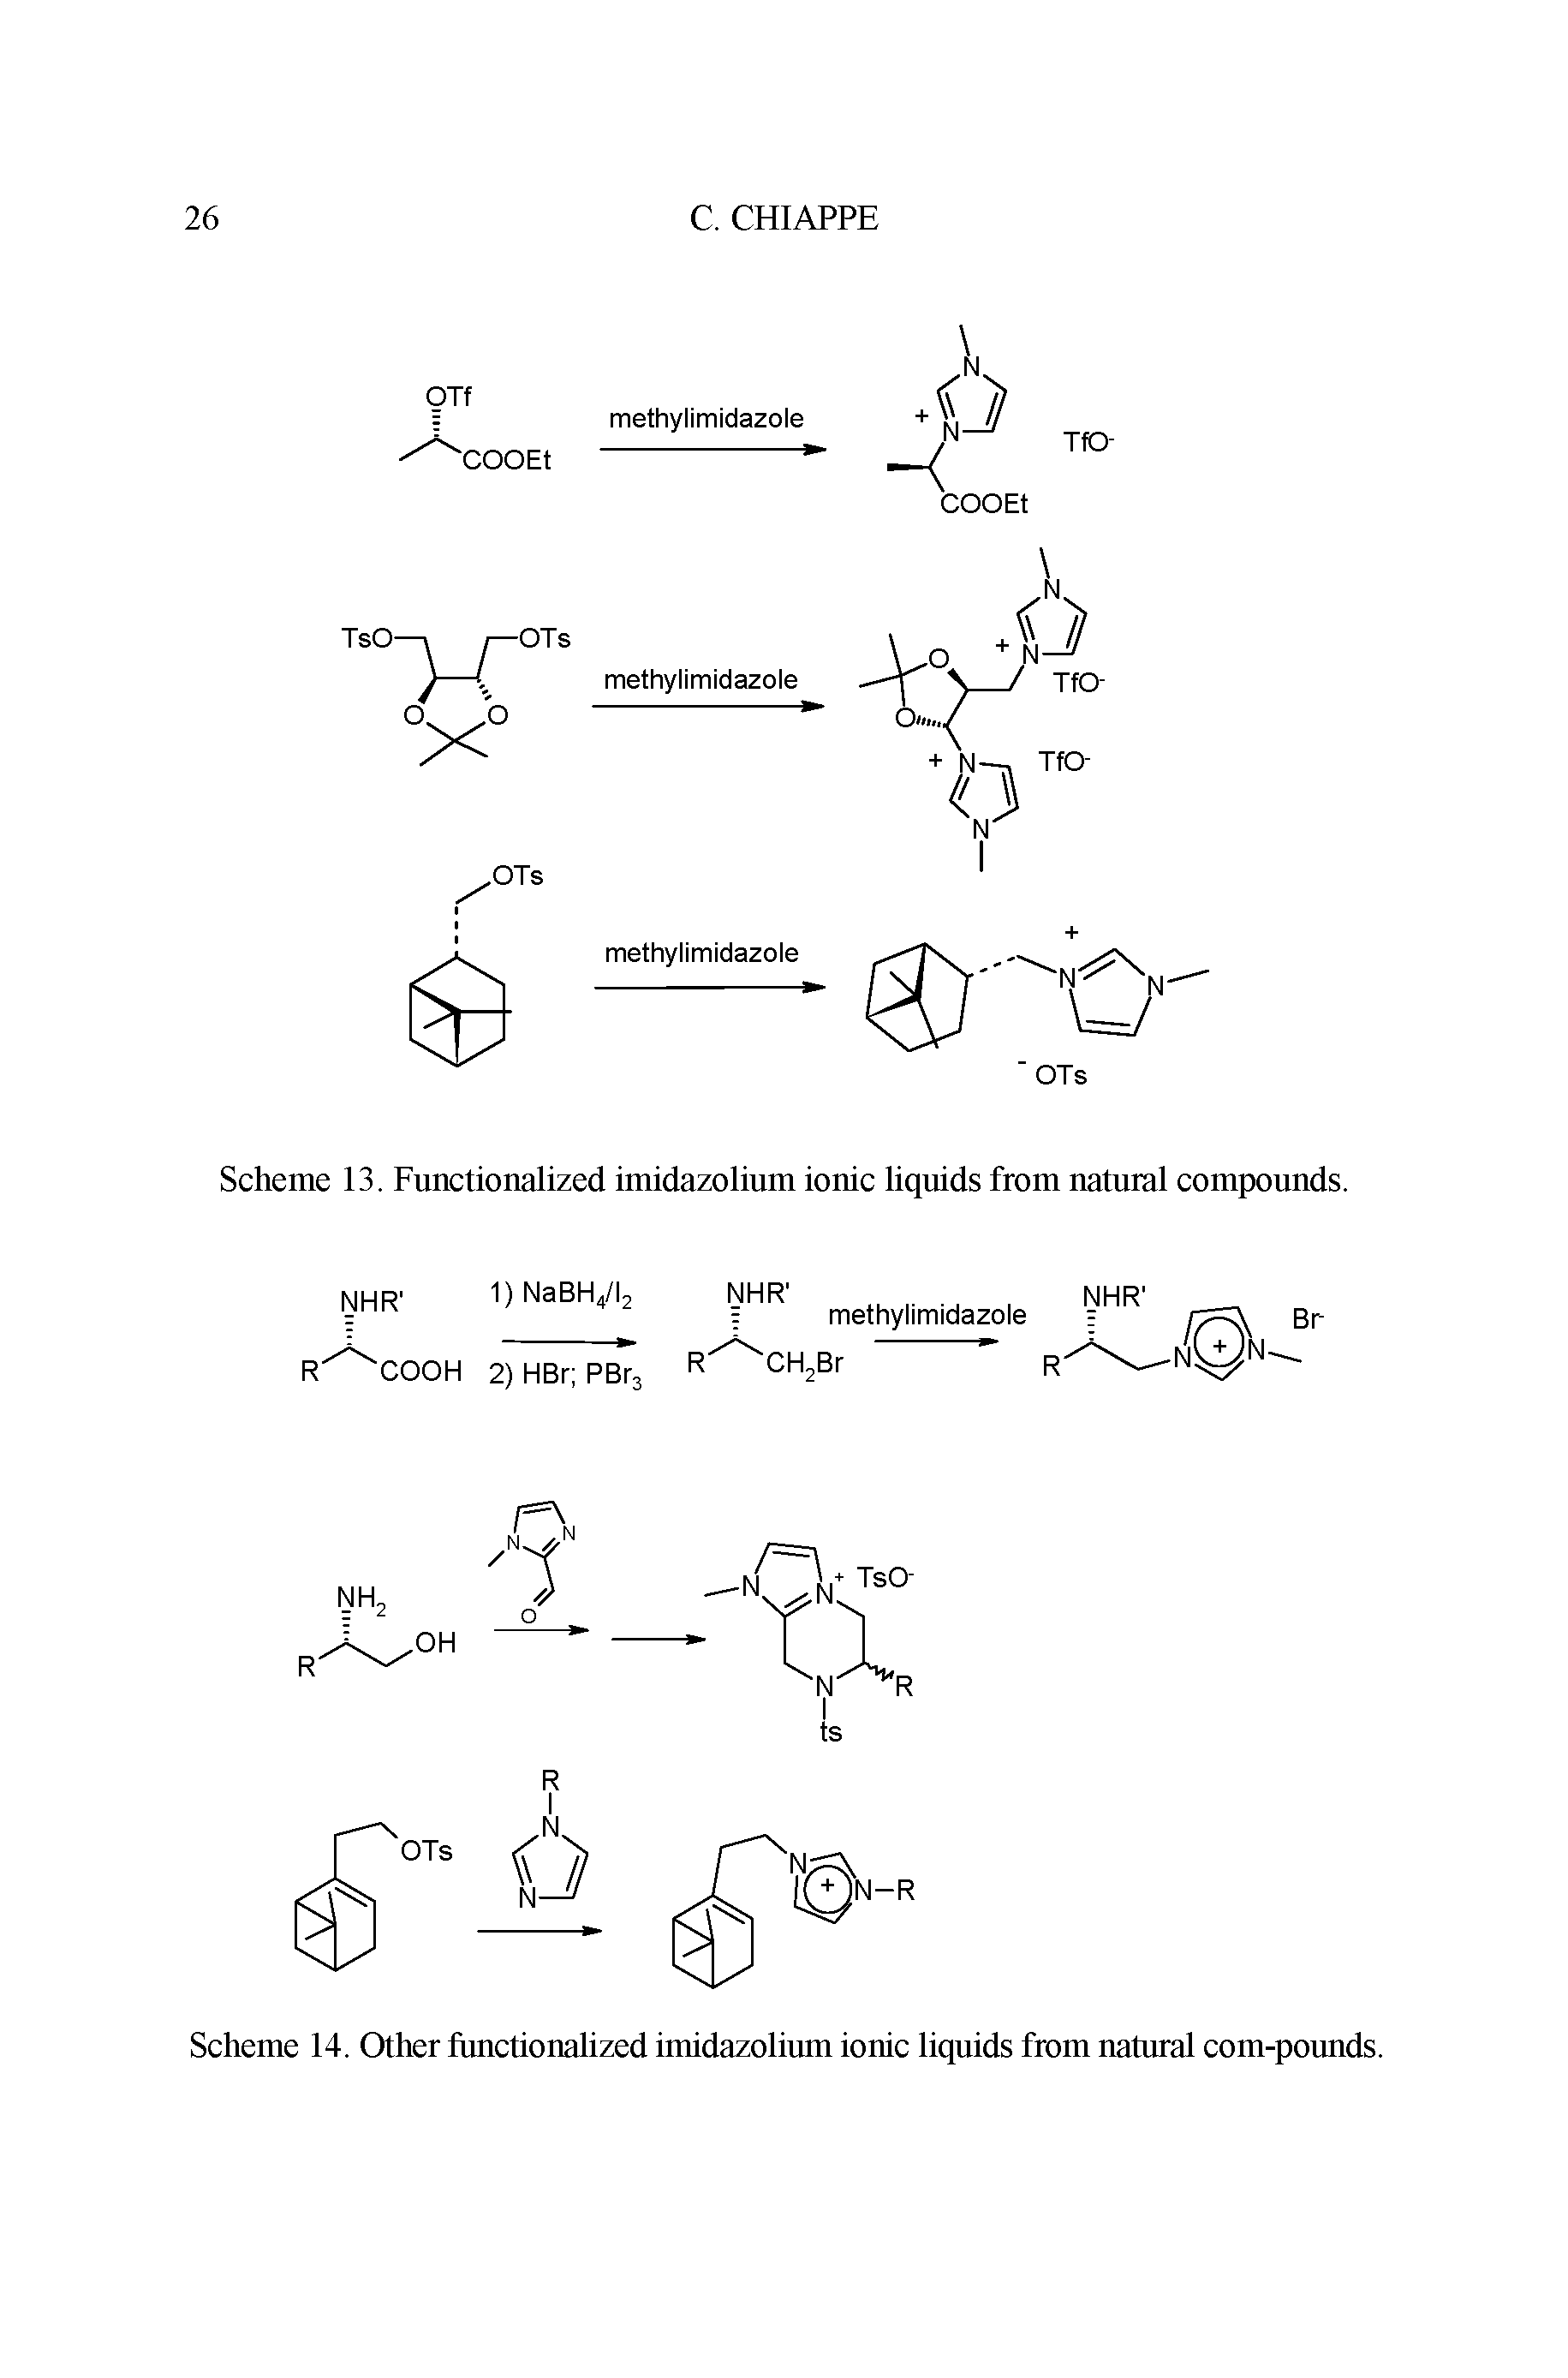 Scheme 13. Functionalized imidazolium ionic liquids from natural compounds.